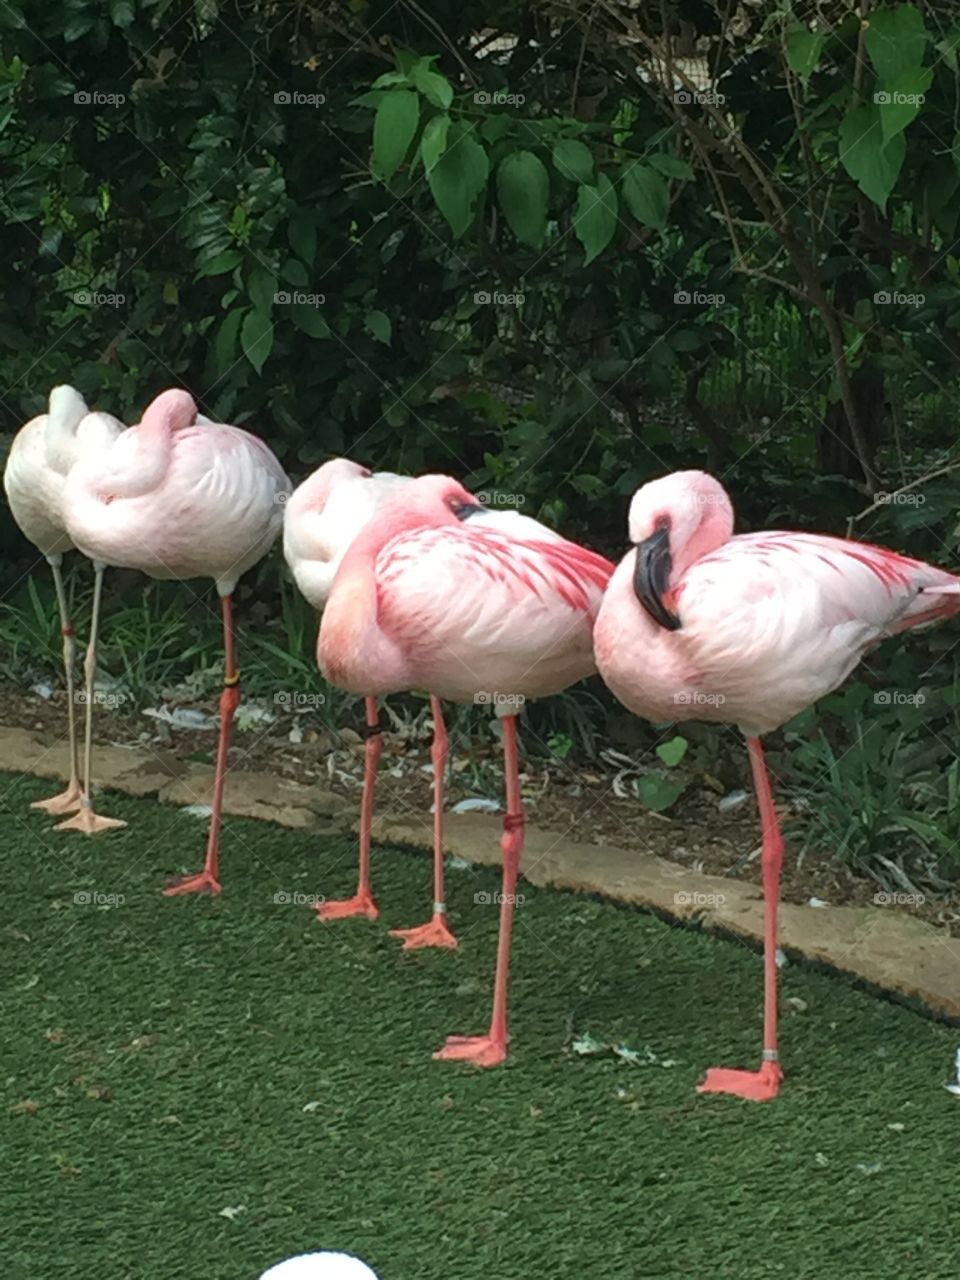 Flamingos at the Fort Worth Zoo